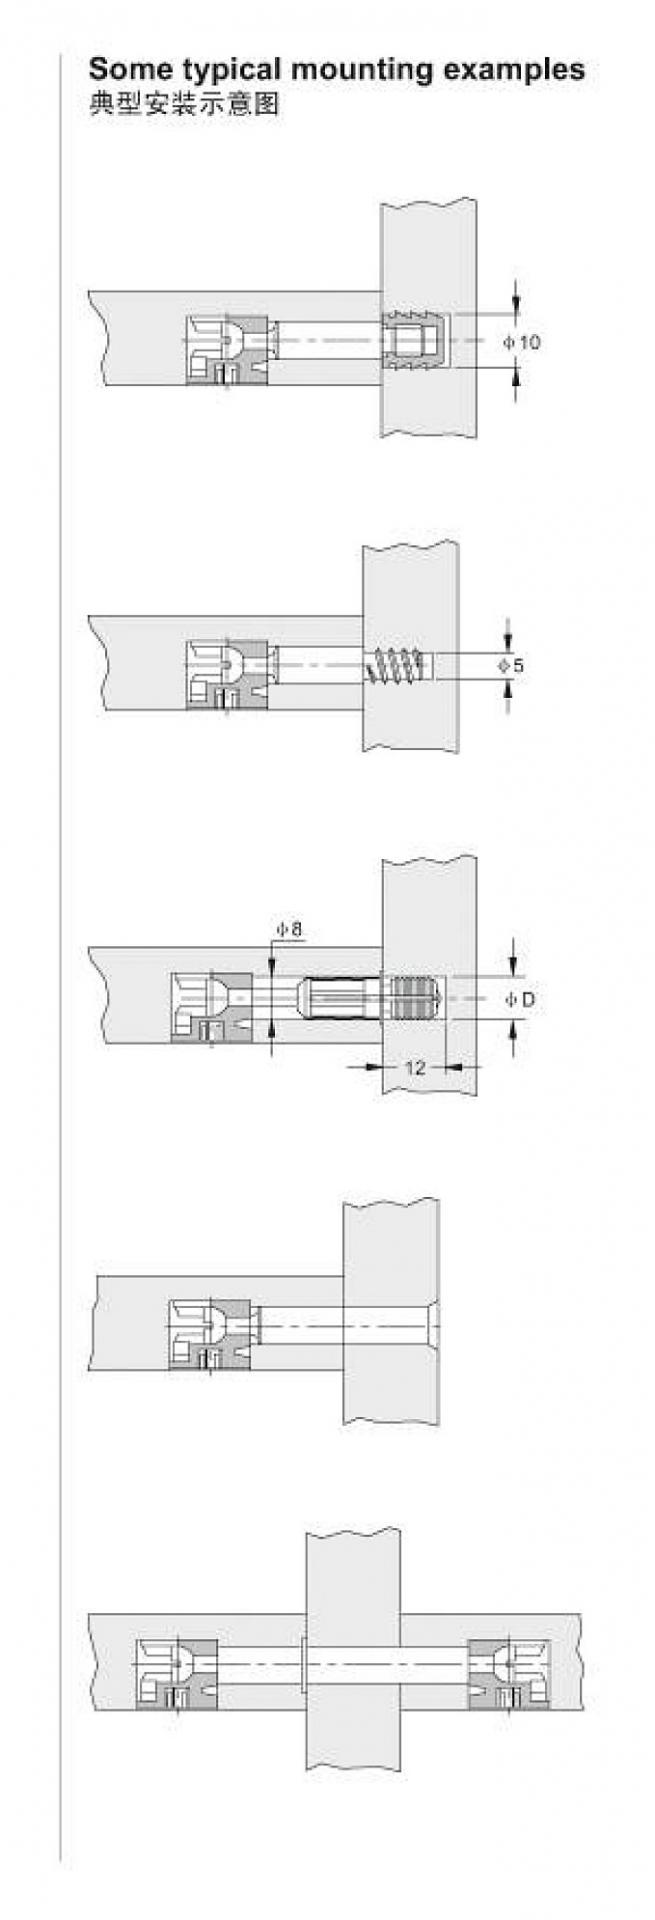 Joint connector bolts